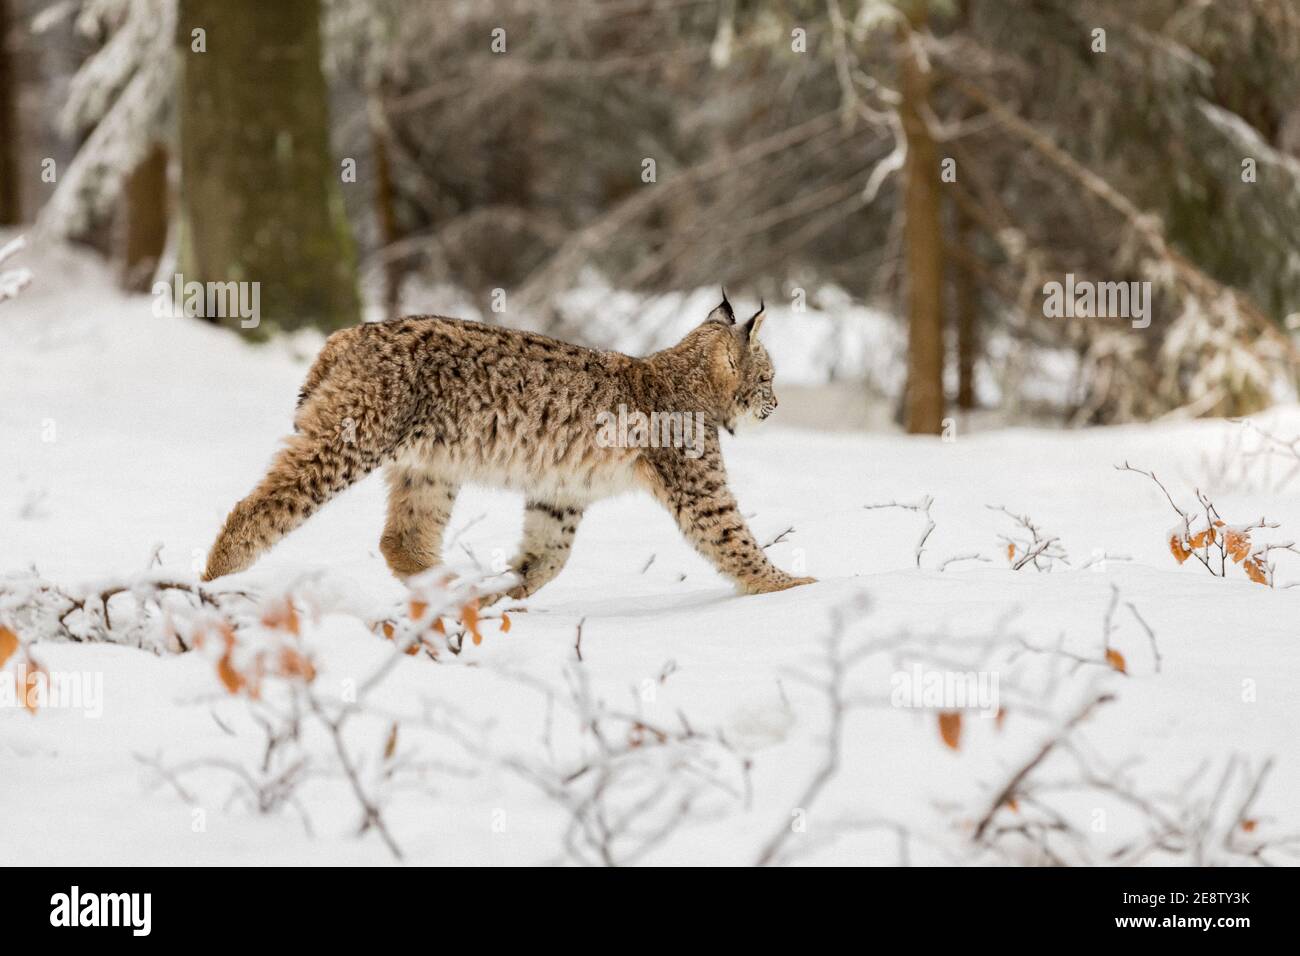 Eurasian Lynx, wild baby cat in the forest with snow. Wildlife scene from winter nature. Cute baby cat in habitat, cold condition. Stock Photo